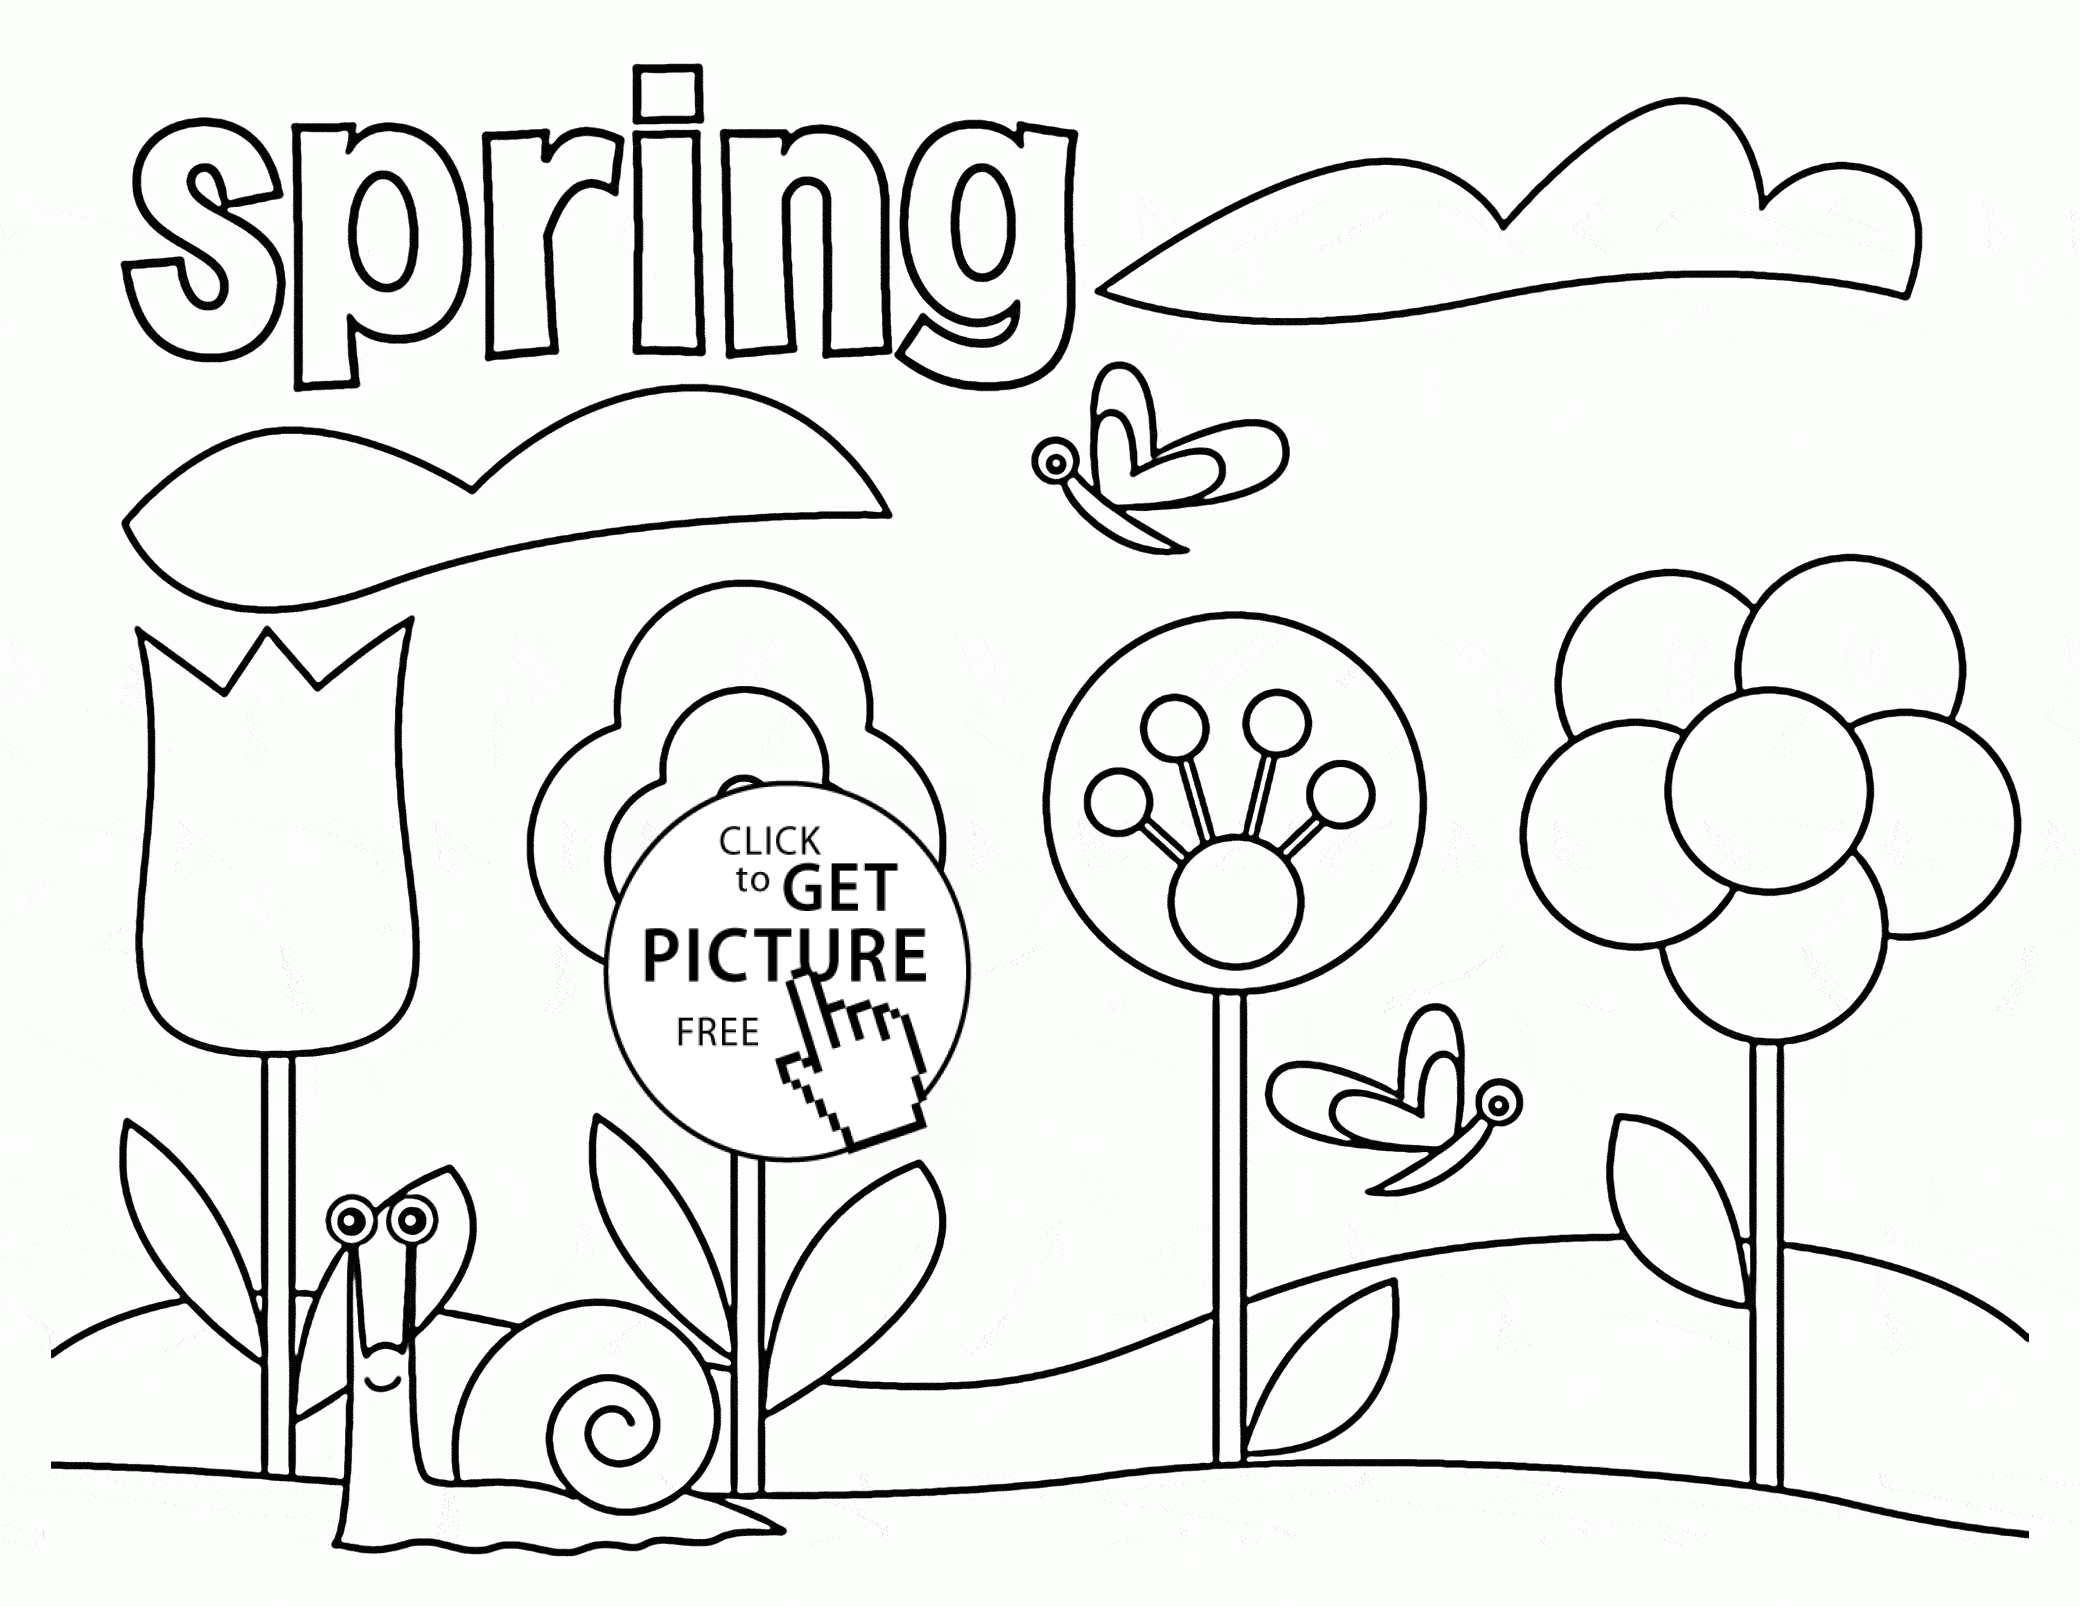 Spring Coloring Pages For Toddlers Coloring Ideas 47 Amazing Free Printable Spring Coloring Pages